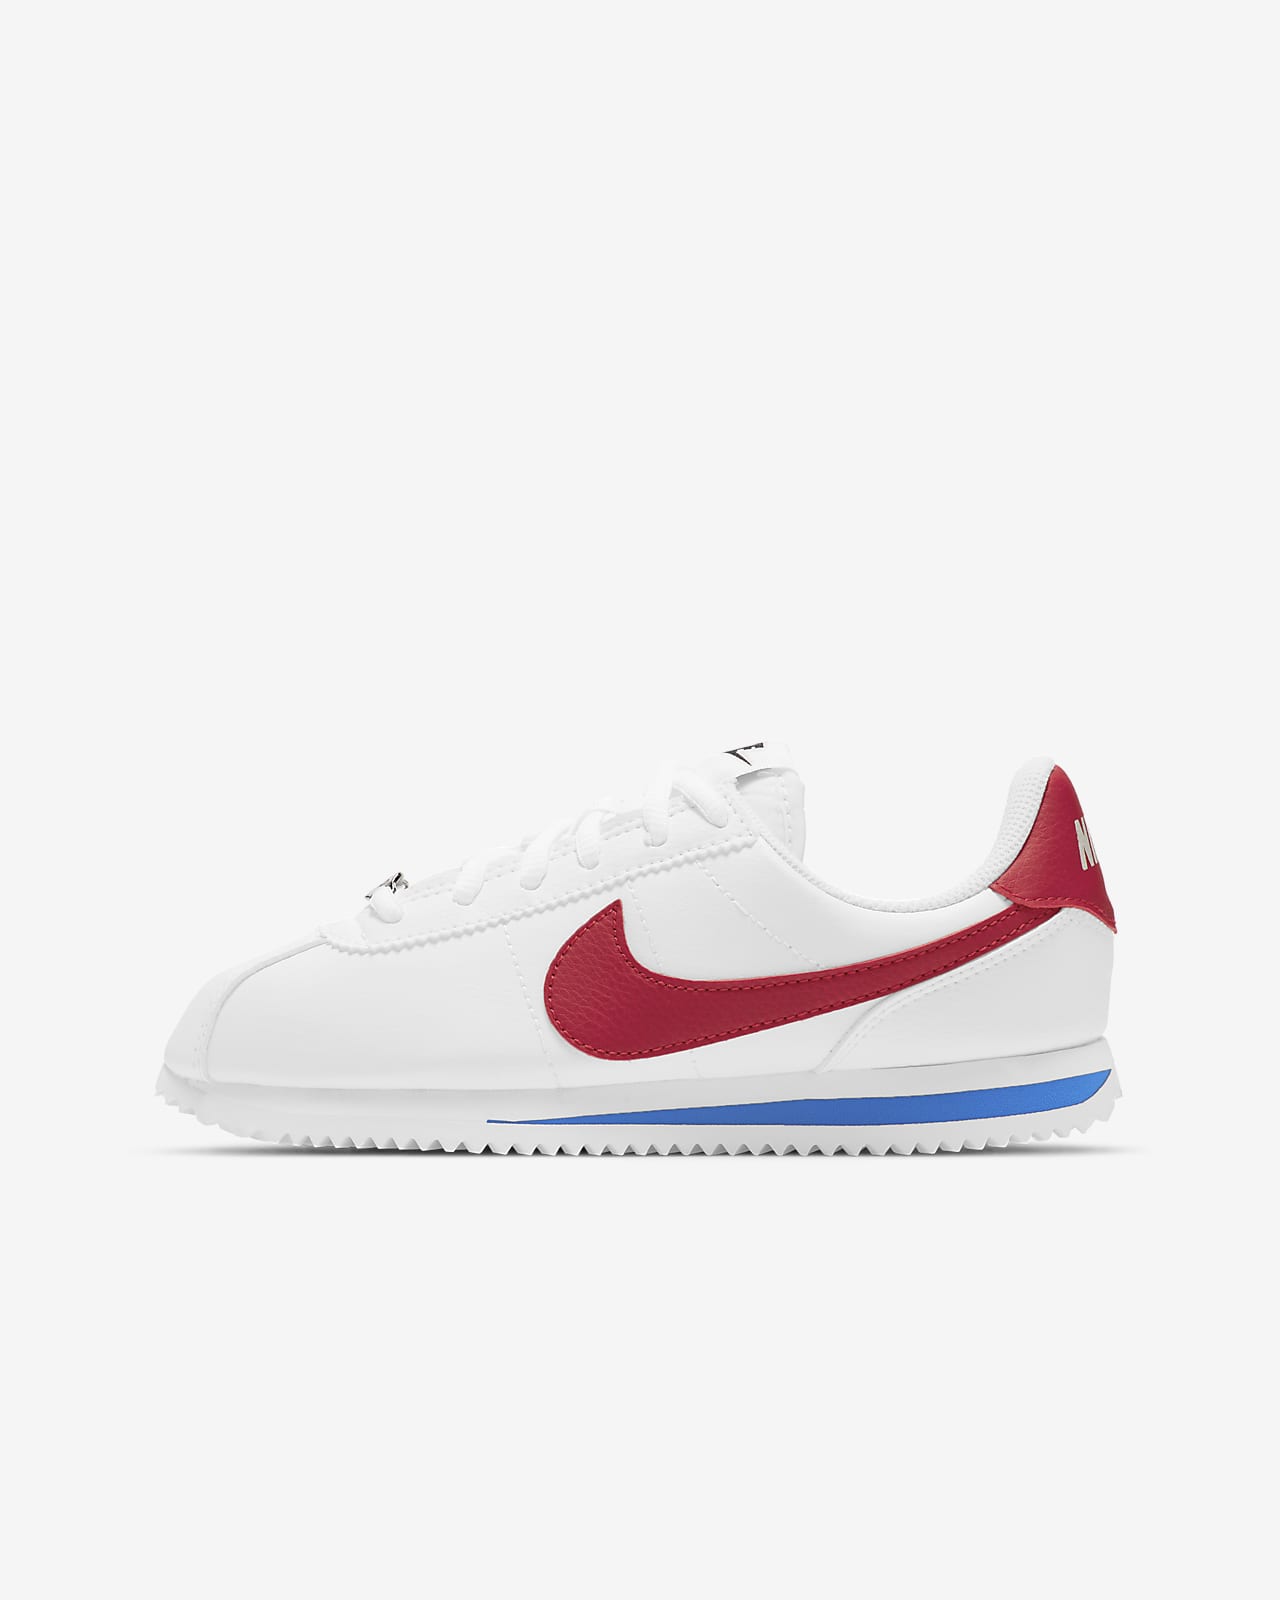 Boys Big Kids Cortez Basic SL Casual Shoes in White/White Size 5.5 Leather Finish Line Boys Shoes Flat Shoes Casual Shoes 